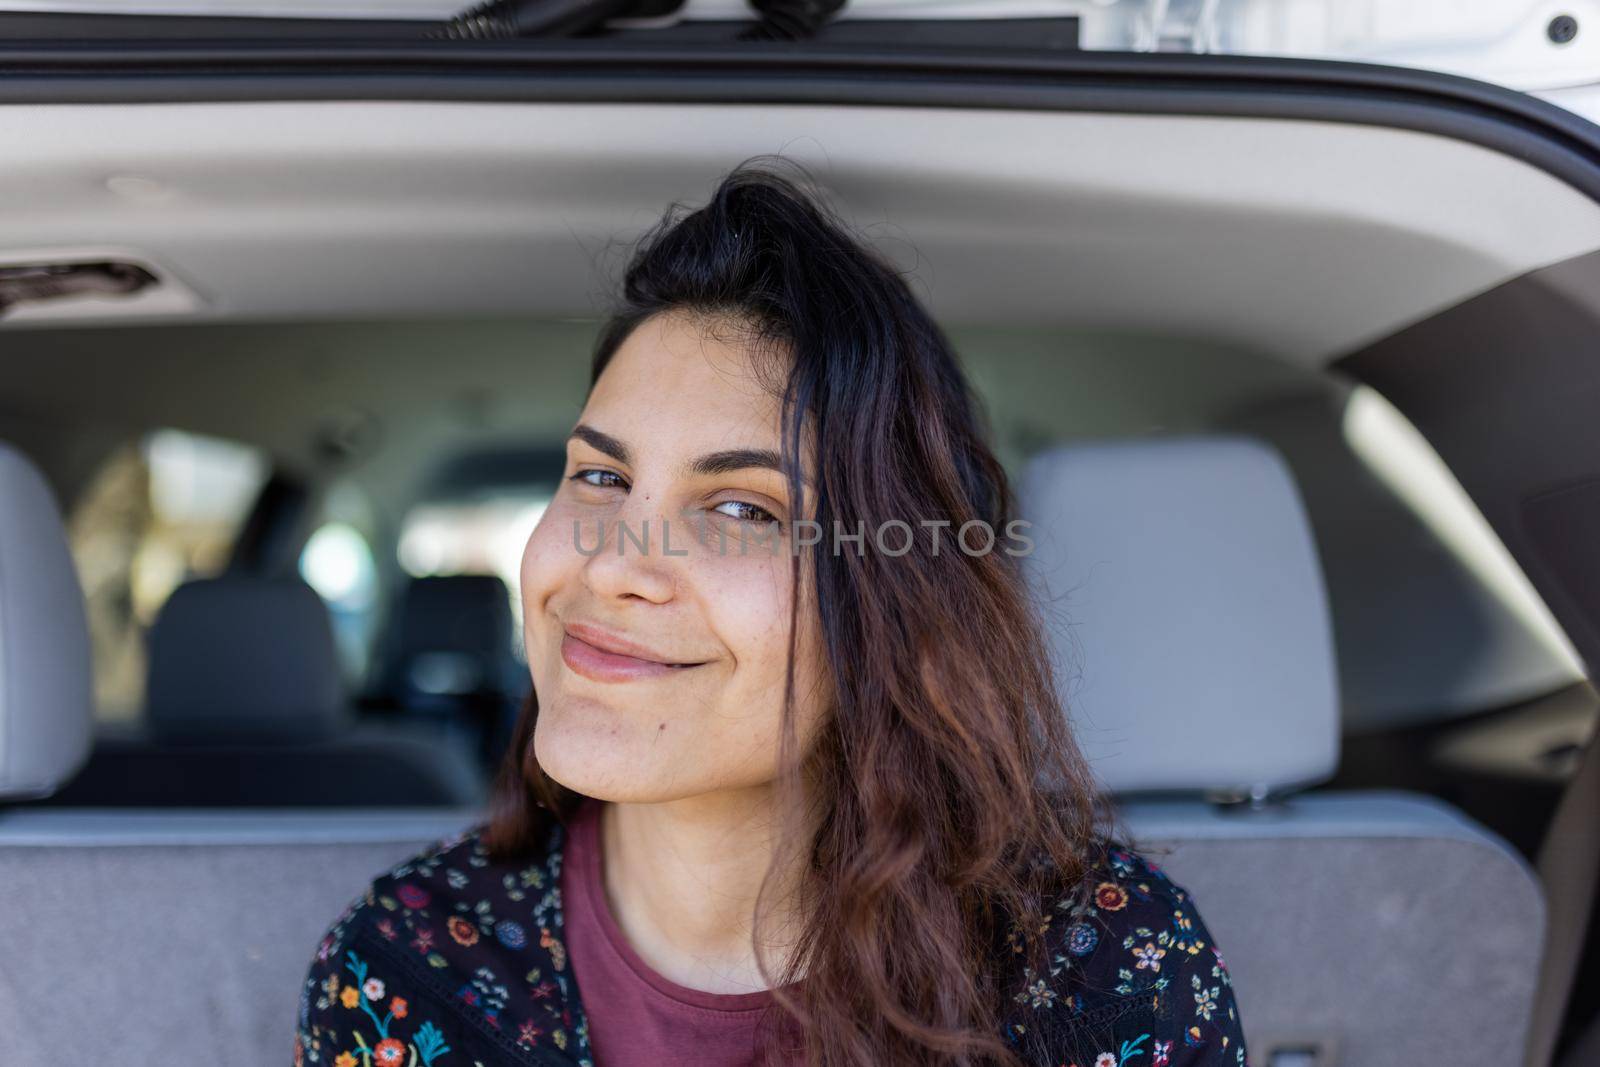 Beautiful woman smiling in the back of an SUV by Kanelbulle